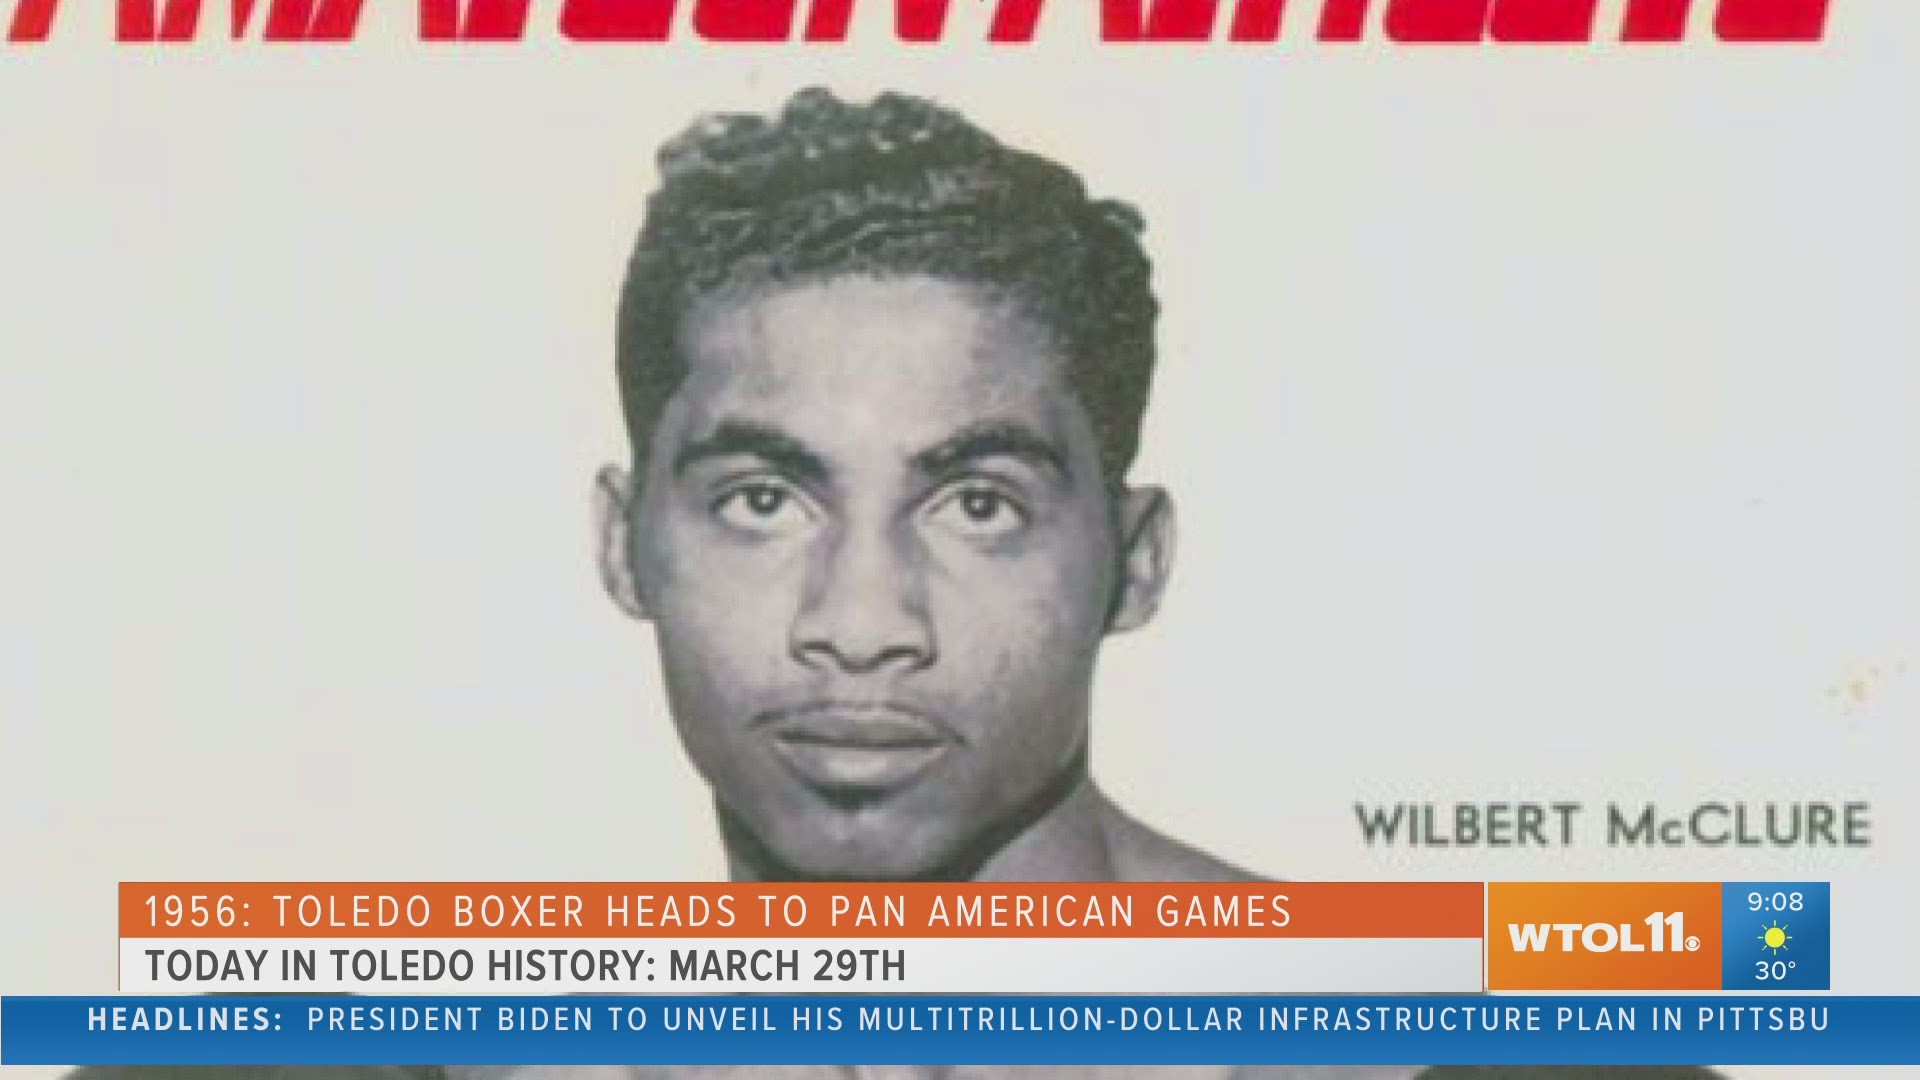 On March 29: Boxer Wilbert "Skeeter" McClure of Toledo earns a spot to compete in the Pan-American Games and the city's officers are embroiled in scandal.